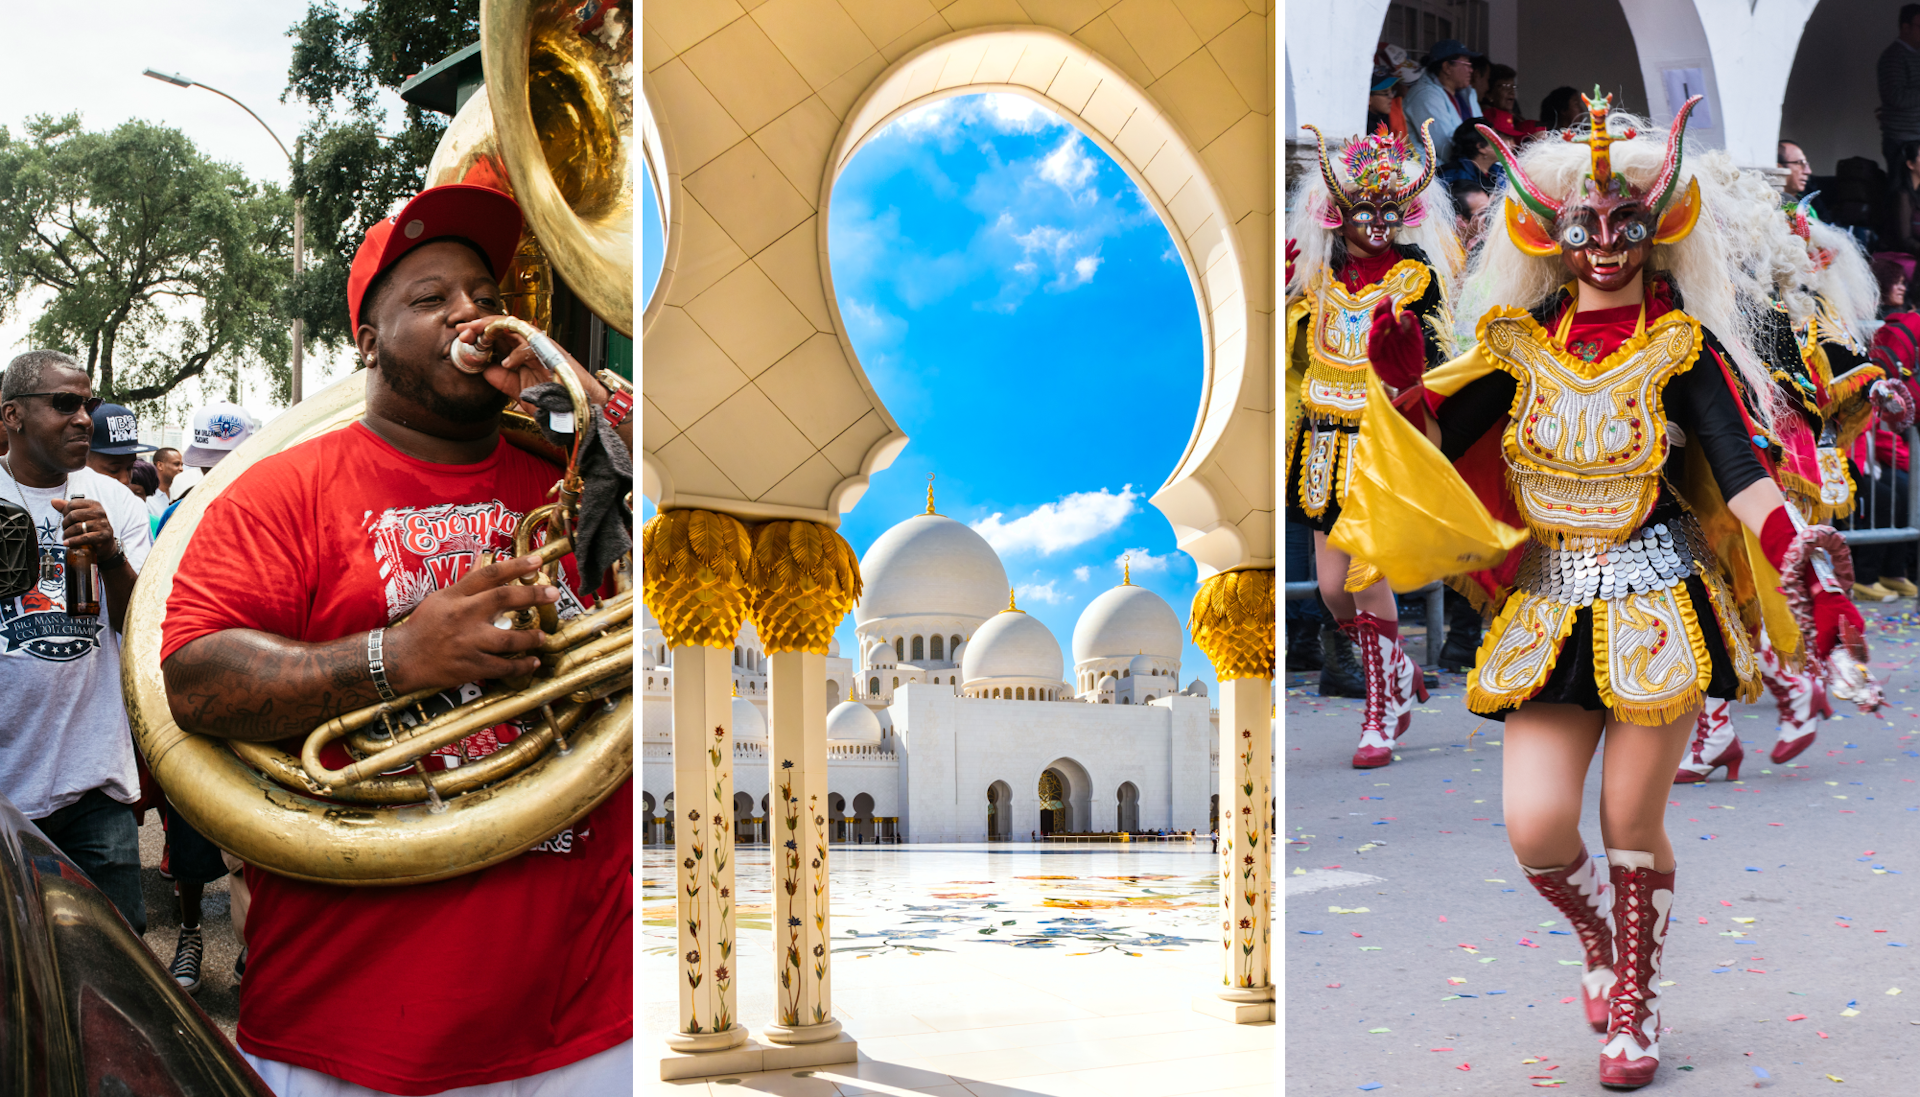 A man celebrates Mardi Gras and more in Louisiana; an incredible work of architecture in the UAE; a costumed dancer in Bolivia.